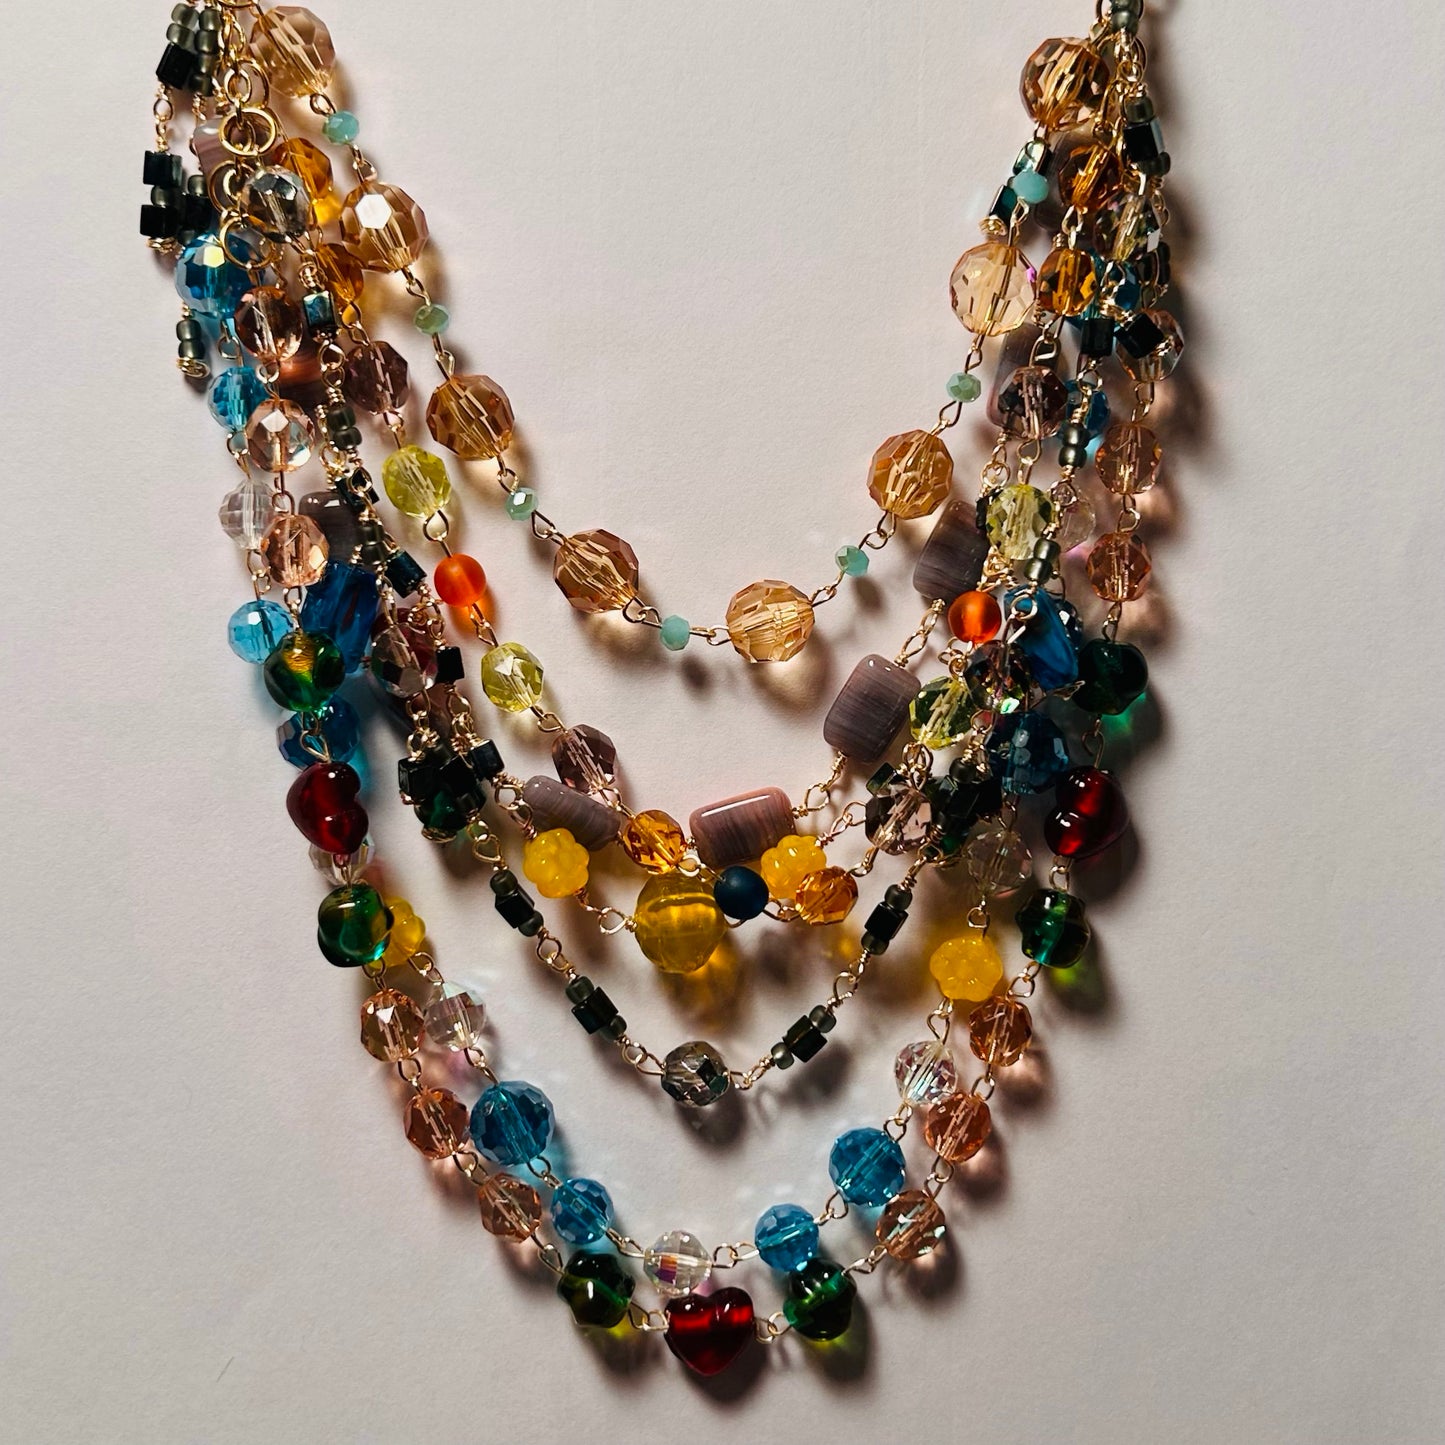 Treasure Chested, MultiStrand Beaded Chain Necklace